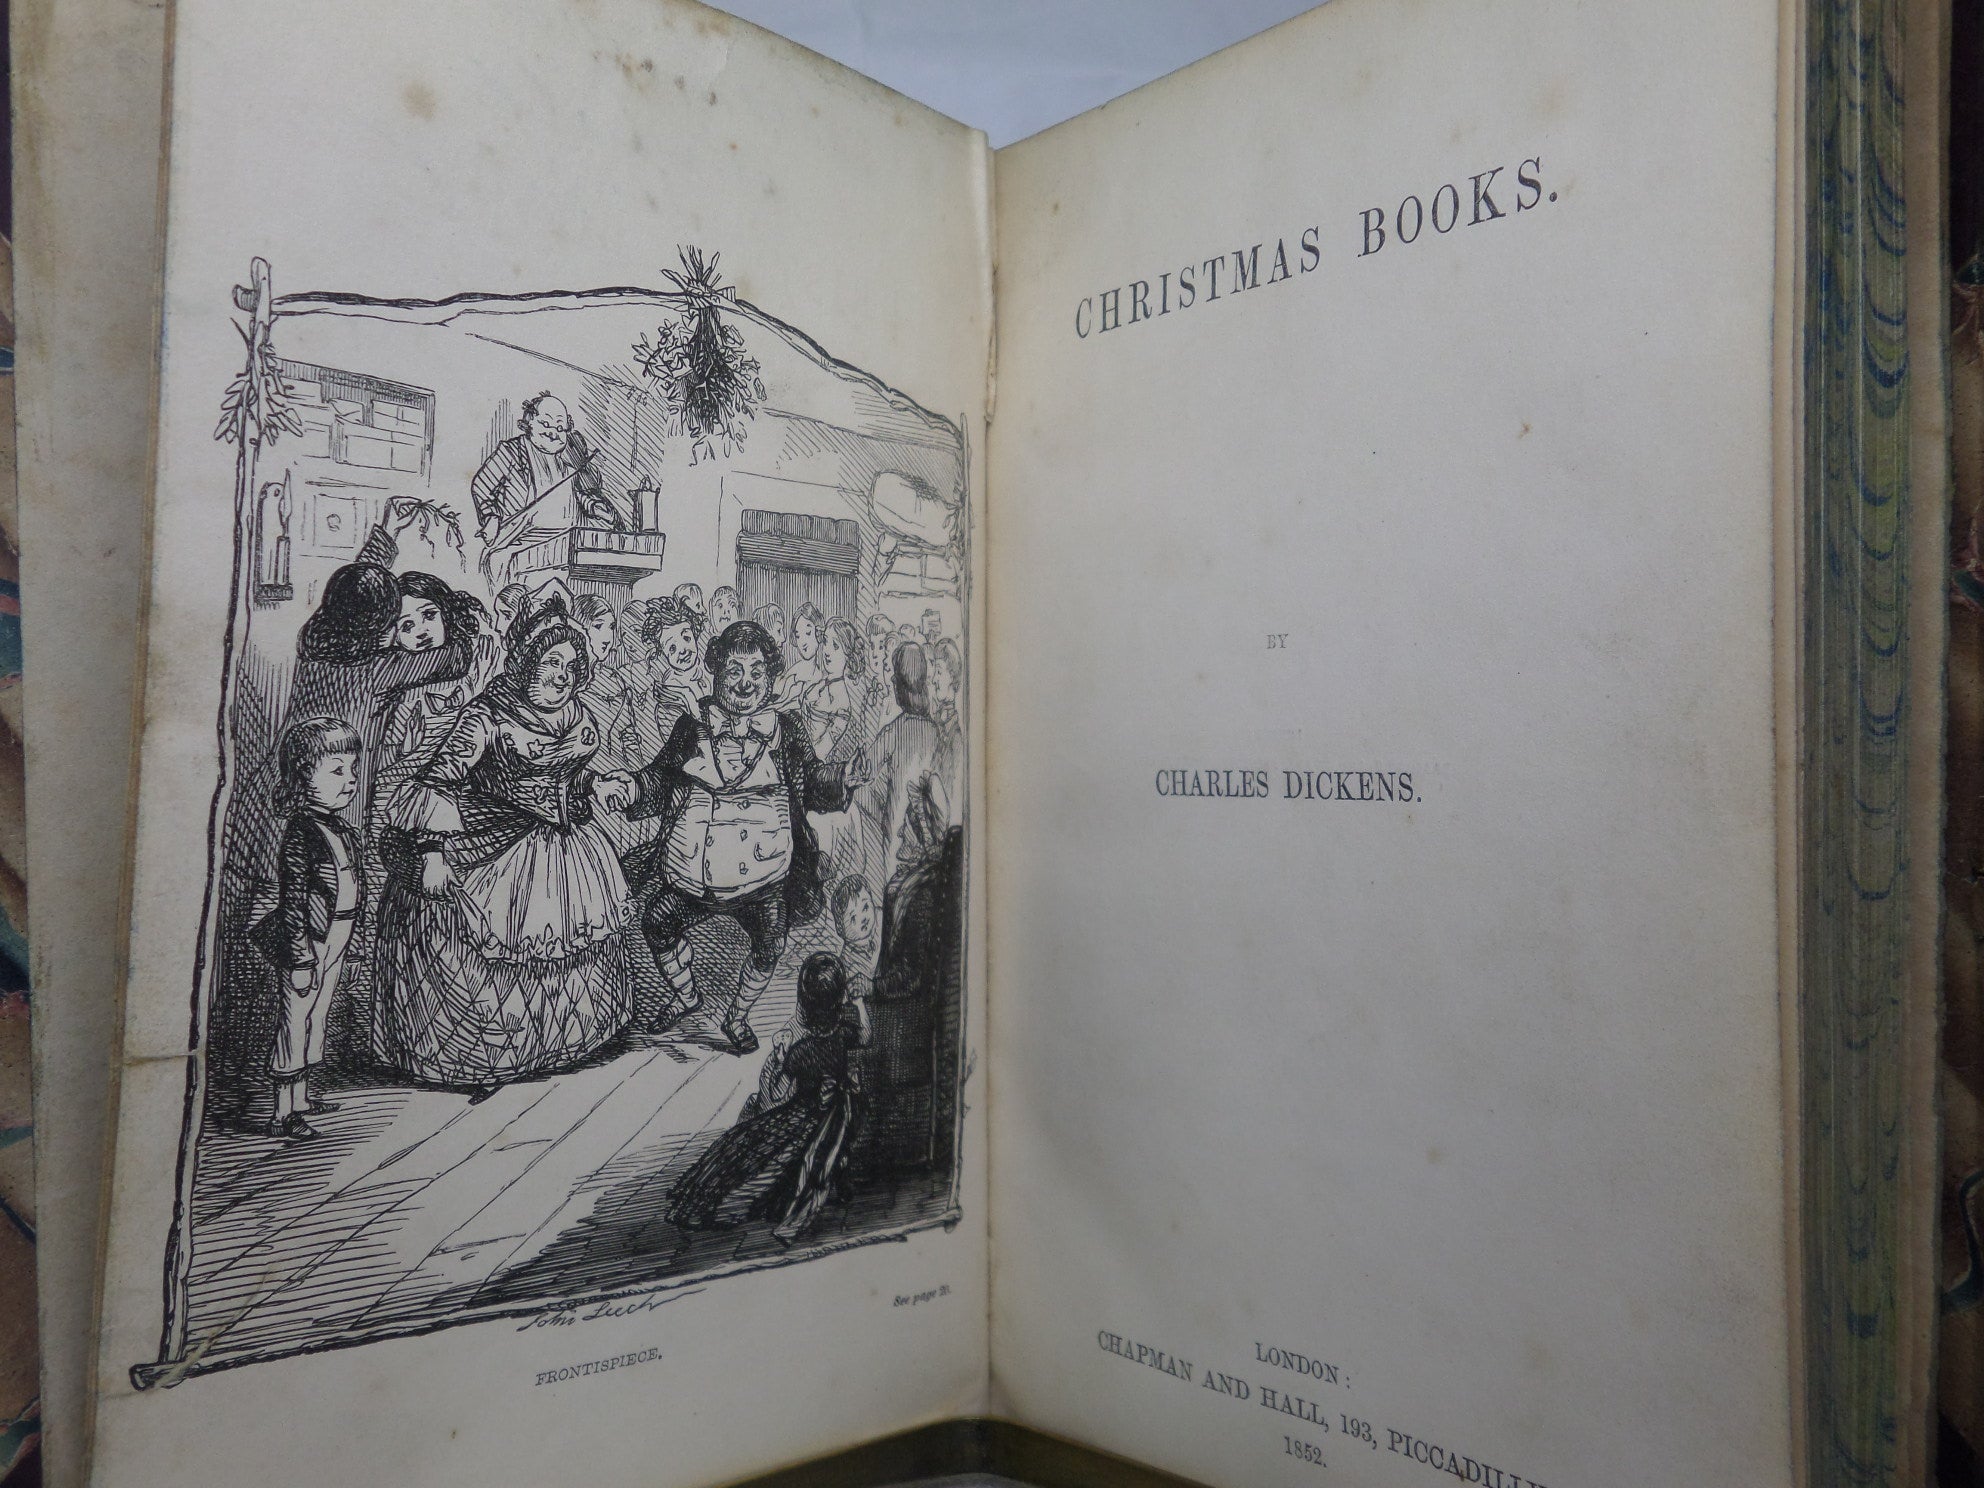 CHRISTMAS BOOKS BY CHARLES DICKENS 1852 LEATHER BOUND FIRST EDITION